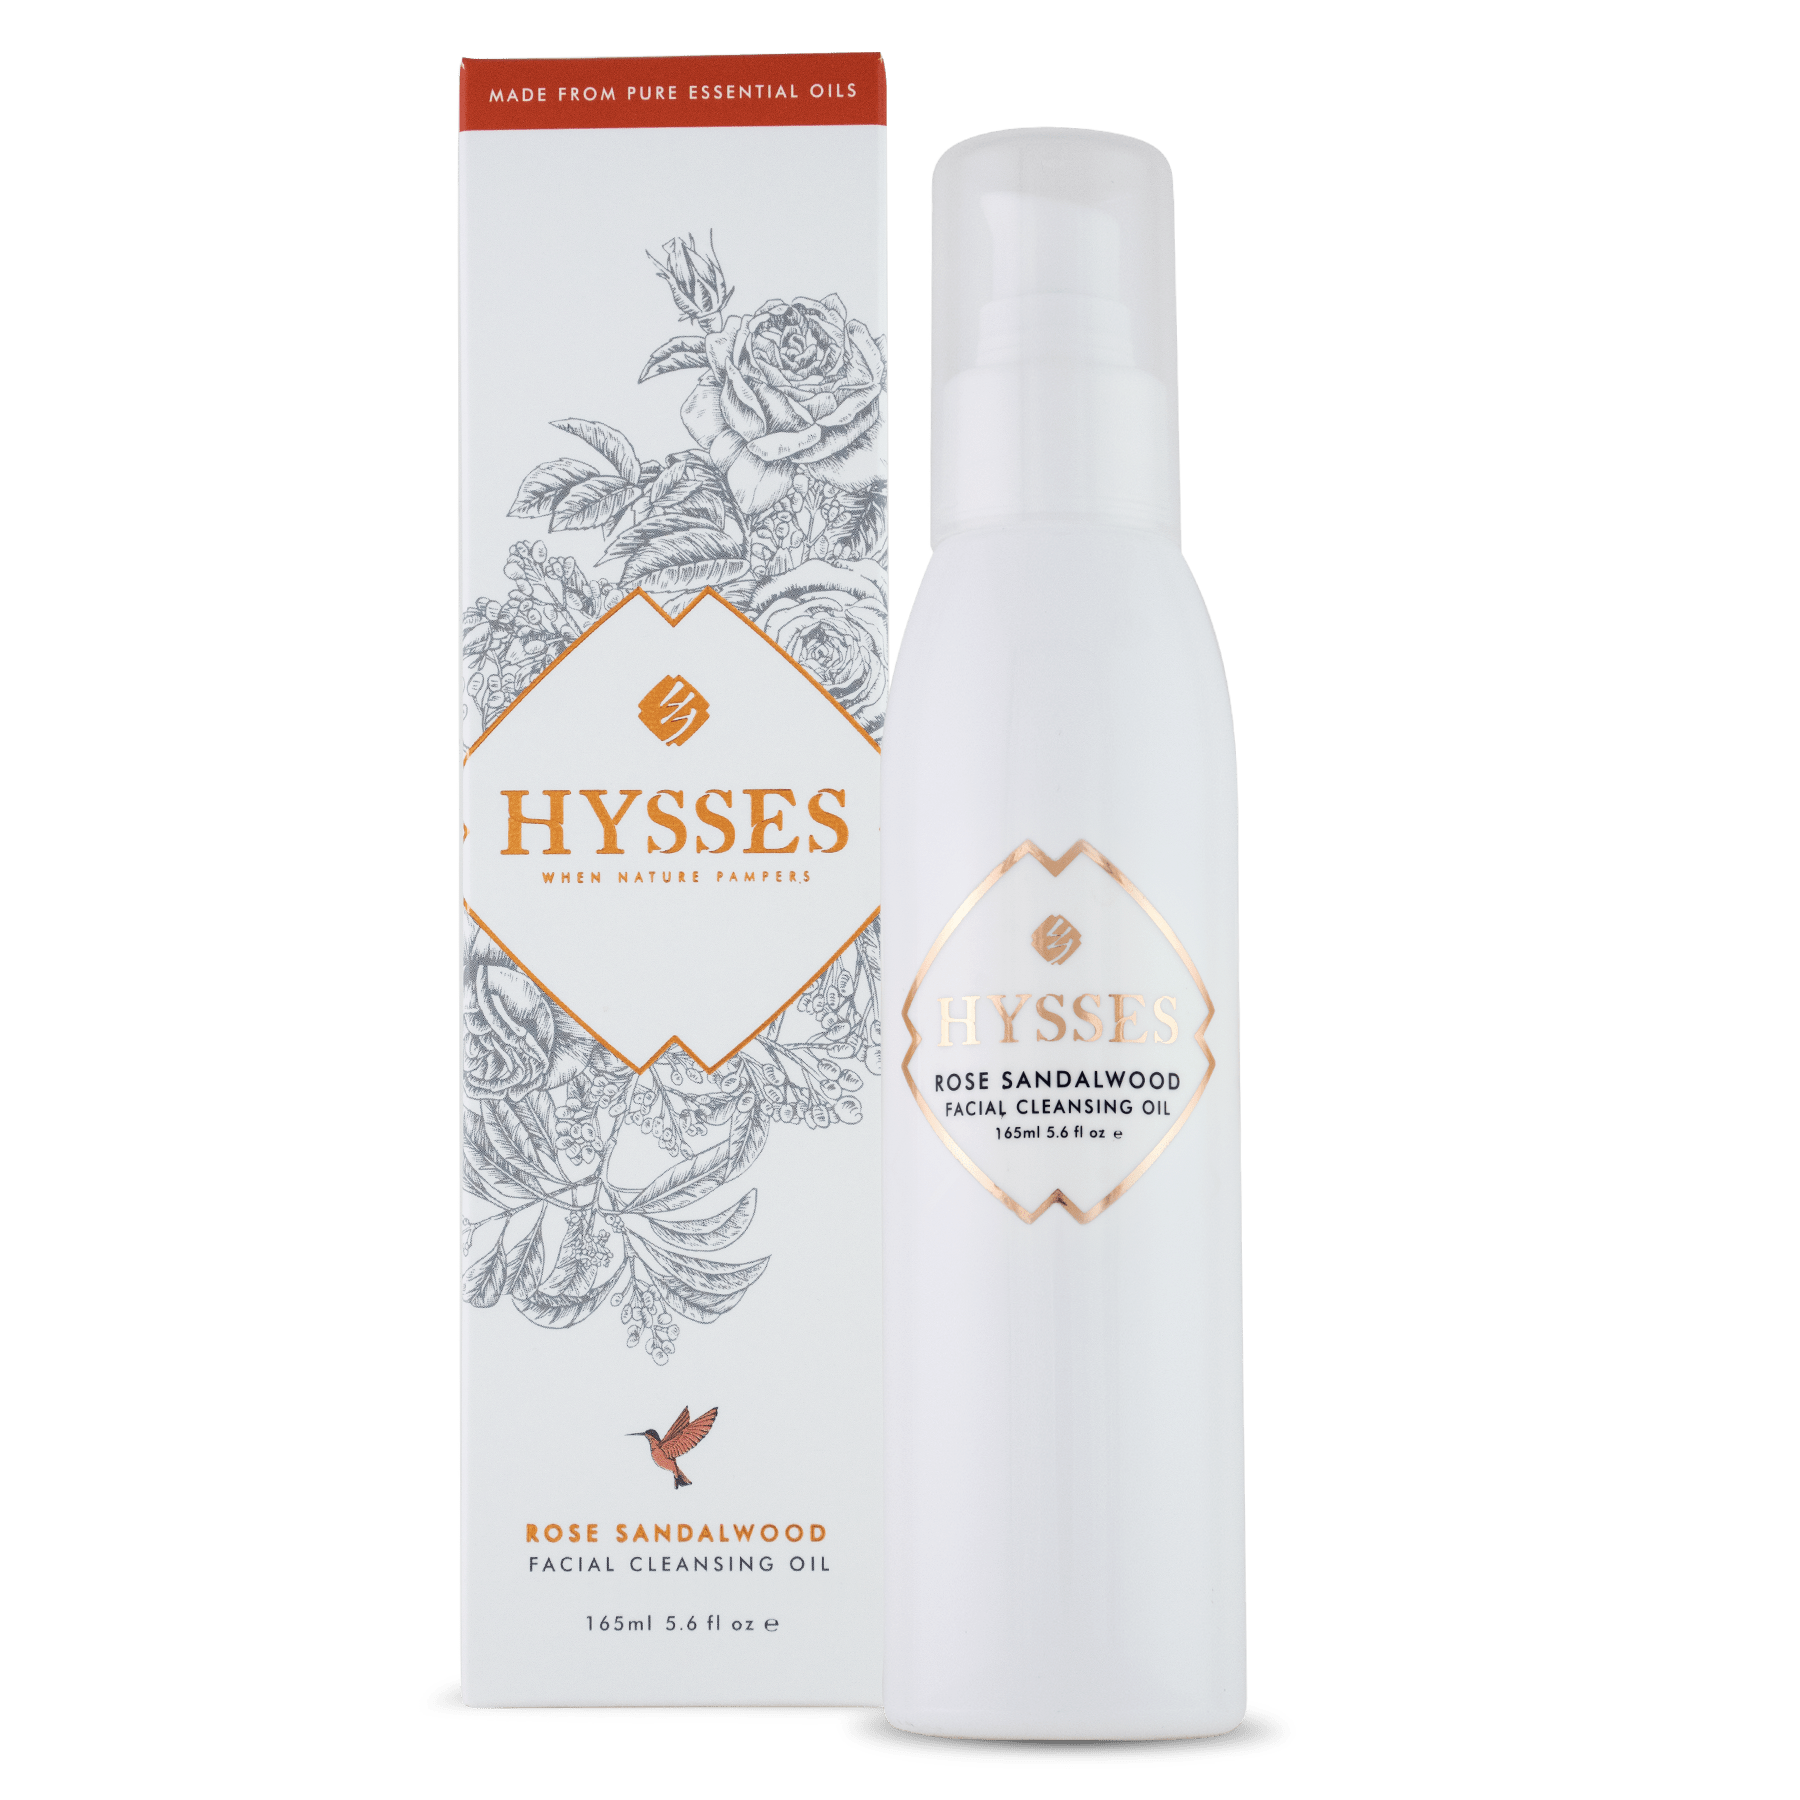 Hysses Face Care FACIAL CLEANSING OIL ROSE SANDALWOOD, 165ML (25%)